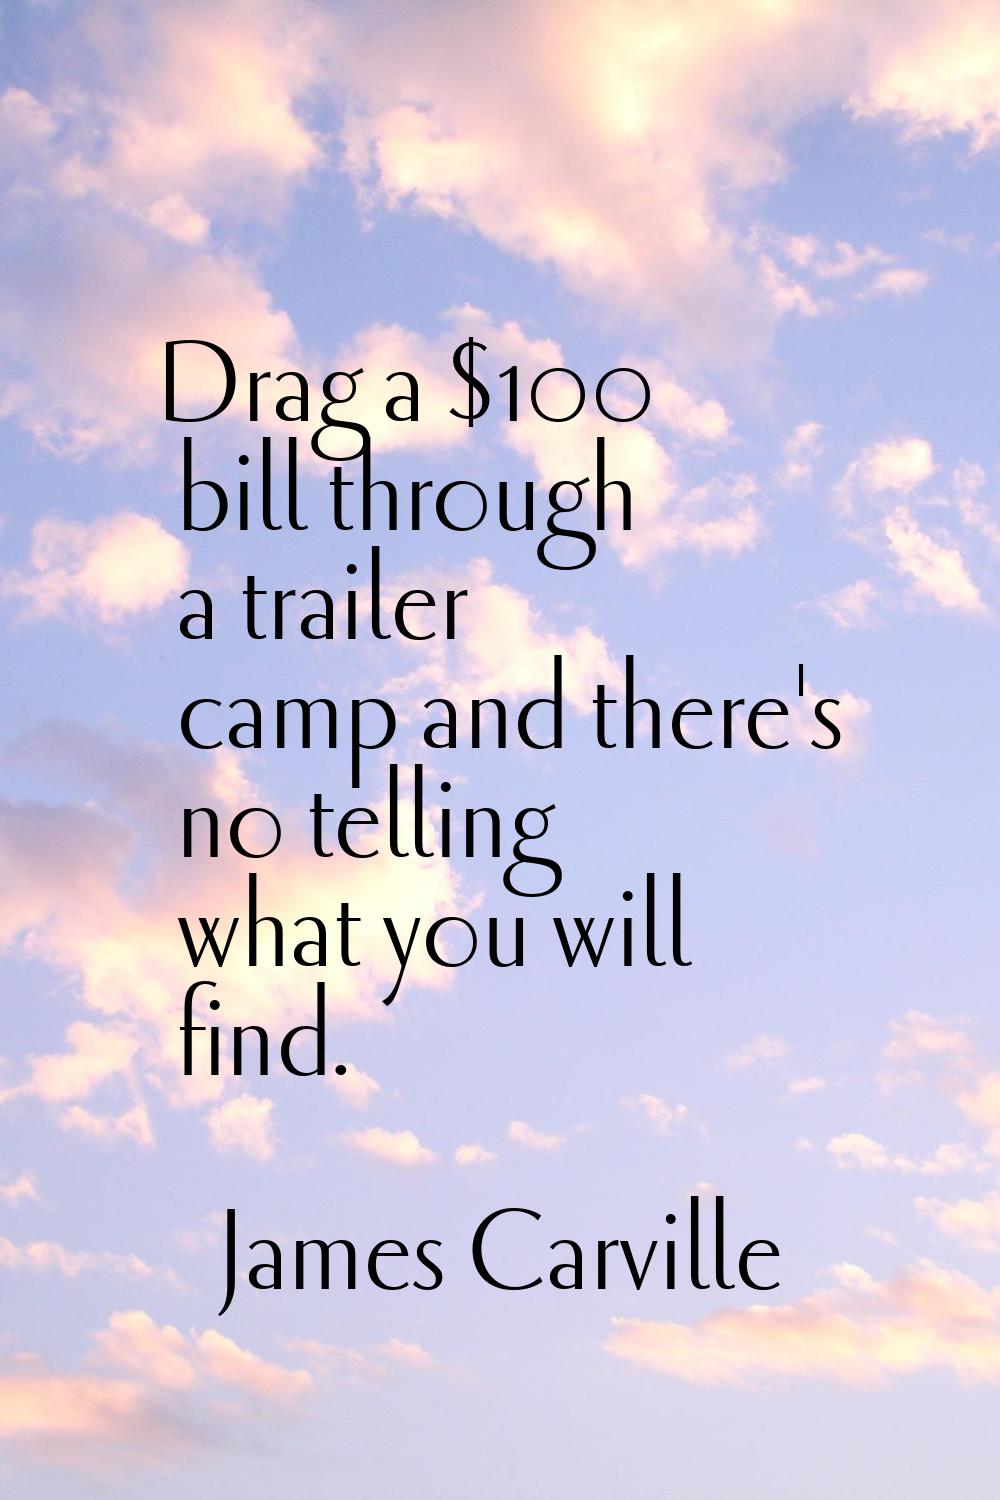 Drag a $100 bill through a trailer camp and there's no telling what you will find.